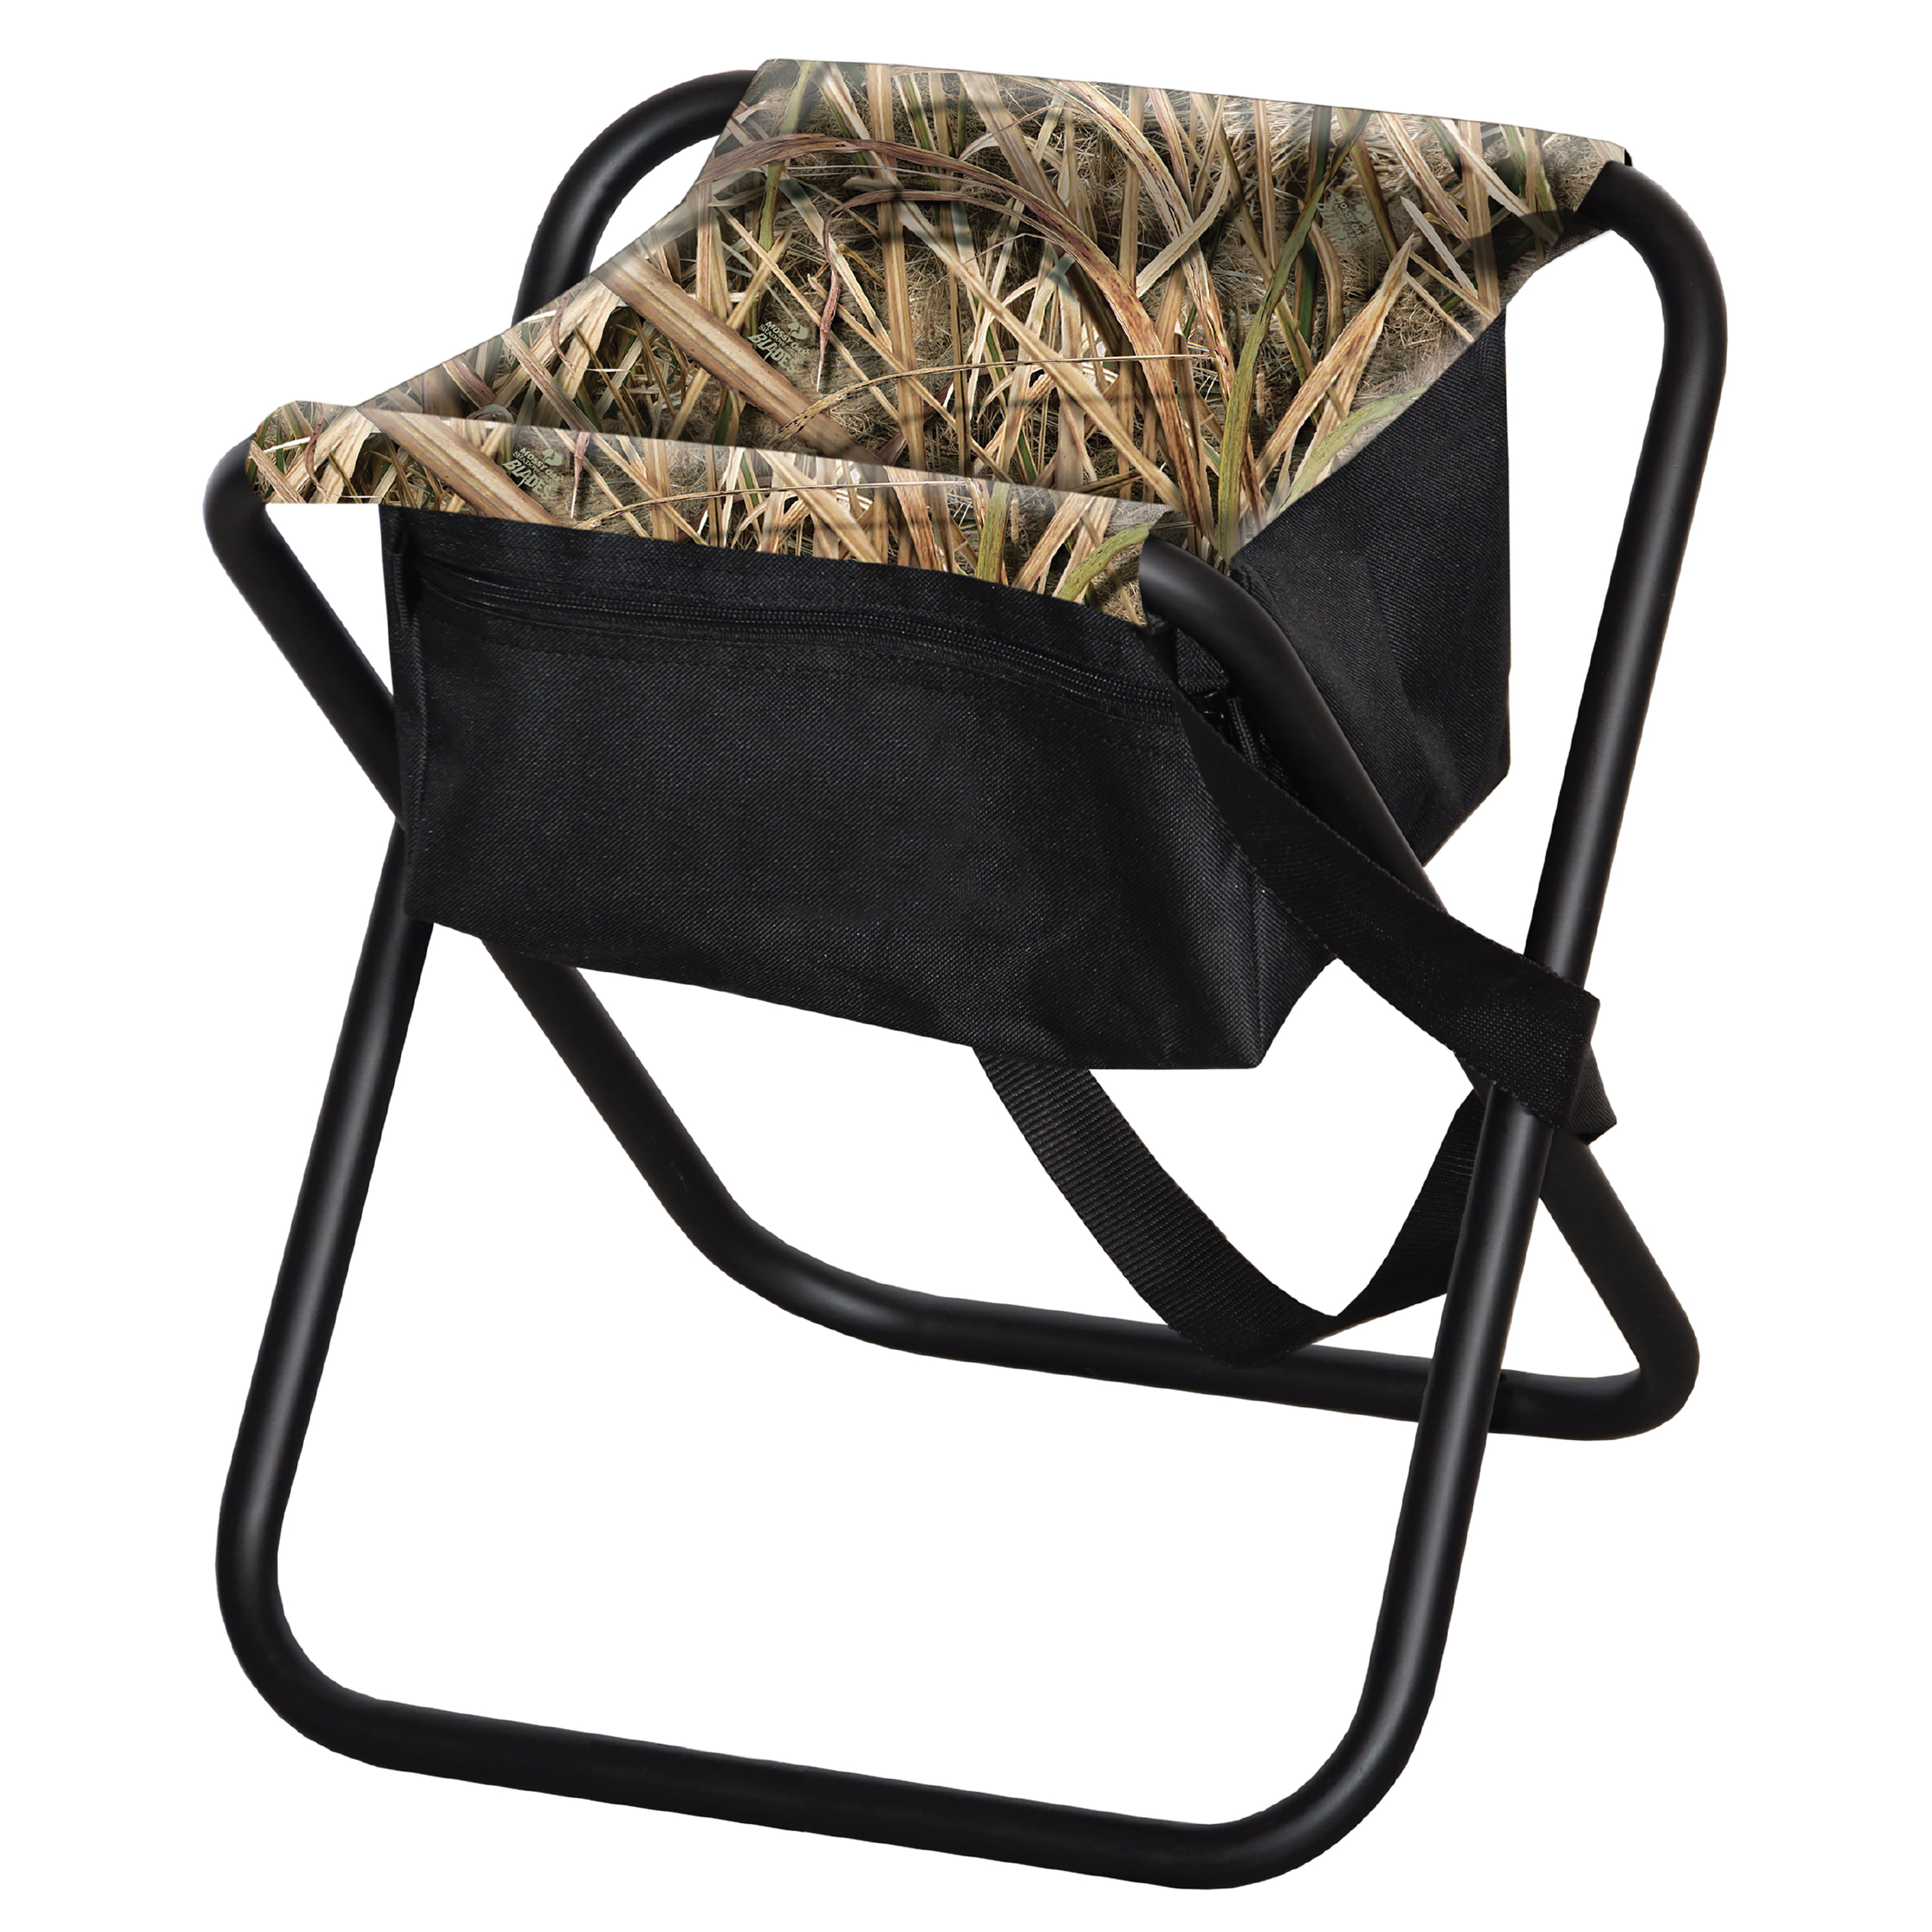 Mossy Oak Hunting Stool with Bag 